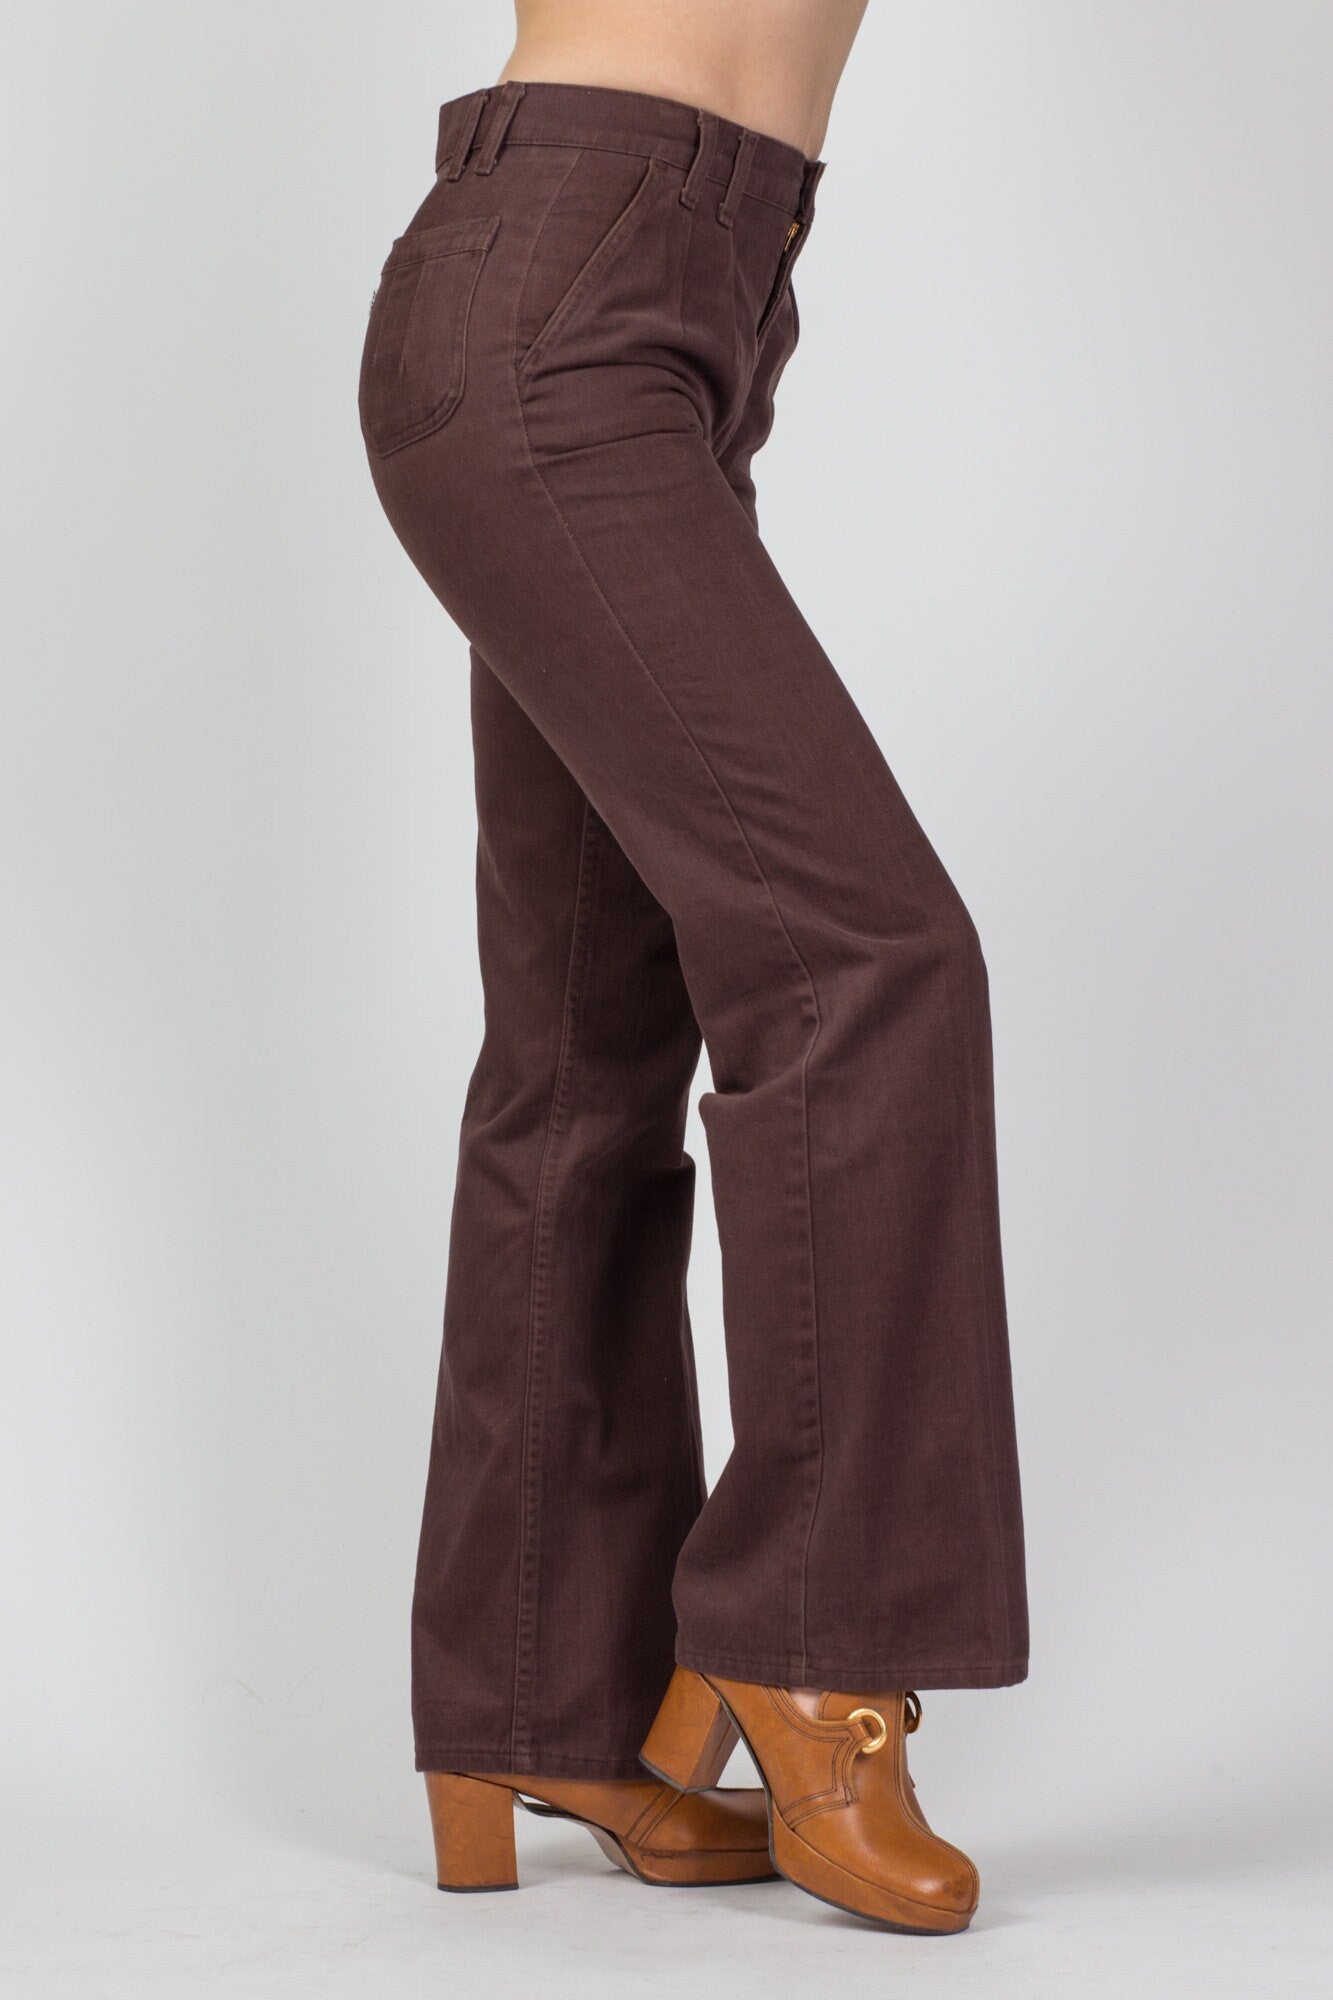 70s Levi's Brown Trousers - 34x32